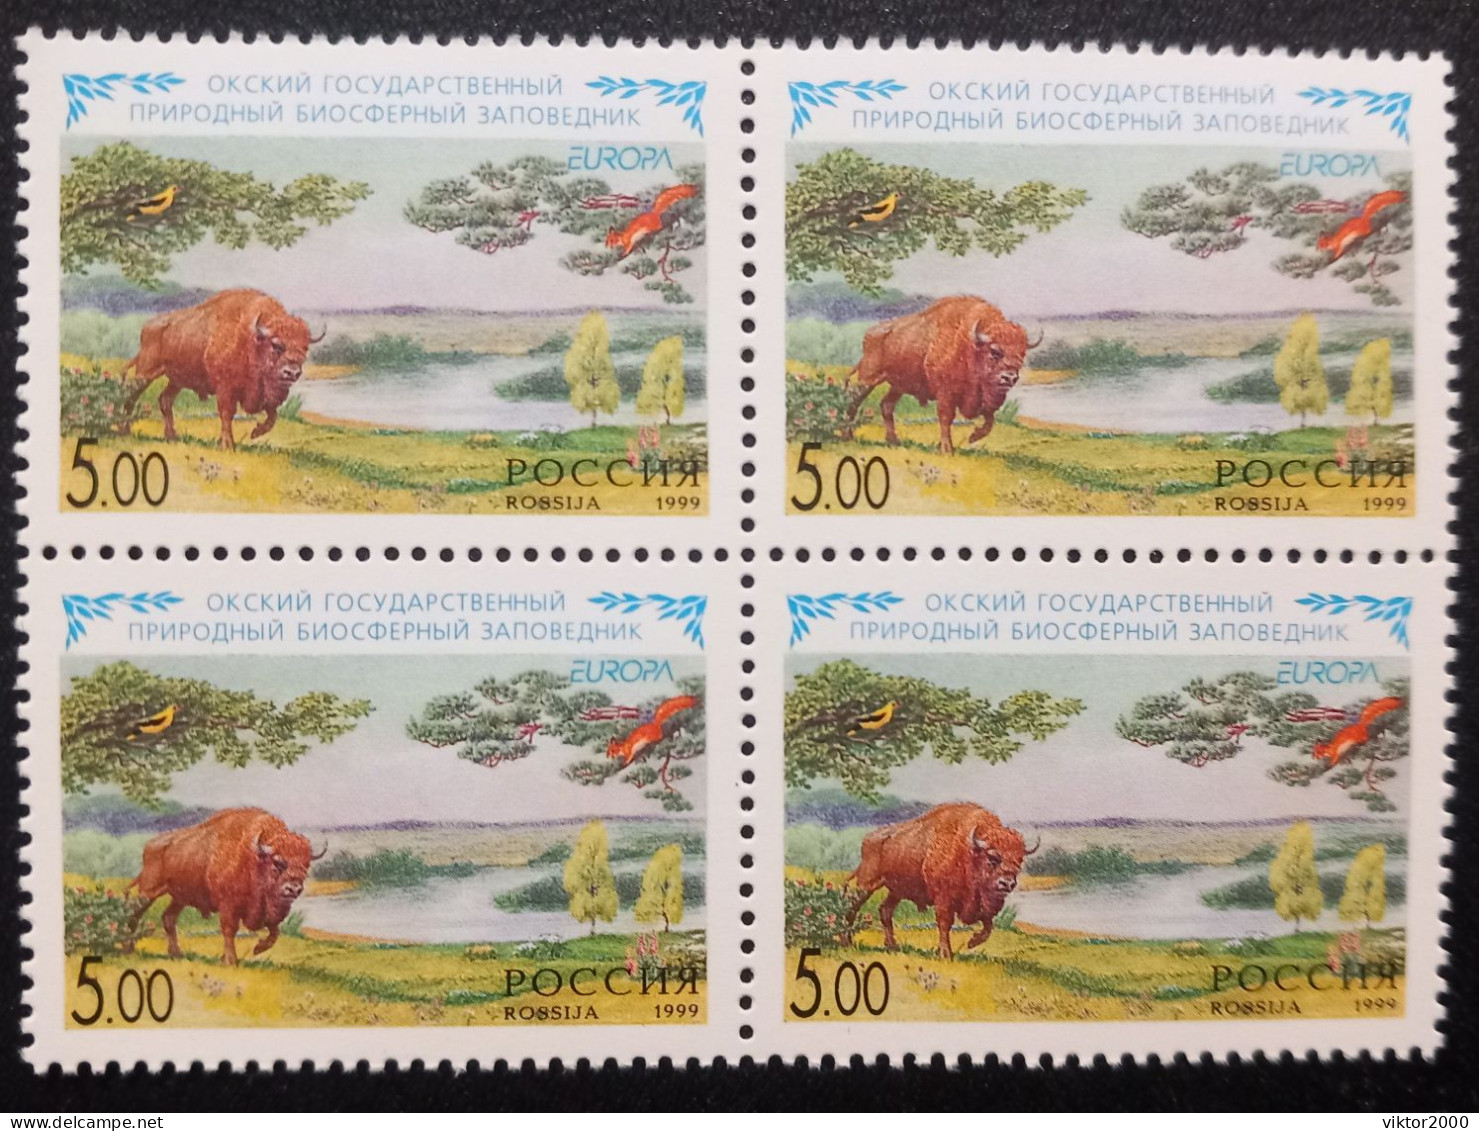 RUSSIA  MNH (**)1999 Oksky State Natural Biosphere Preserve.bison "Europe" Program Issue.Mi 722 - Neufs